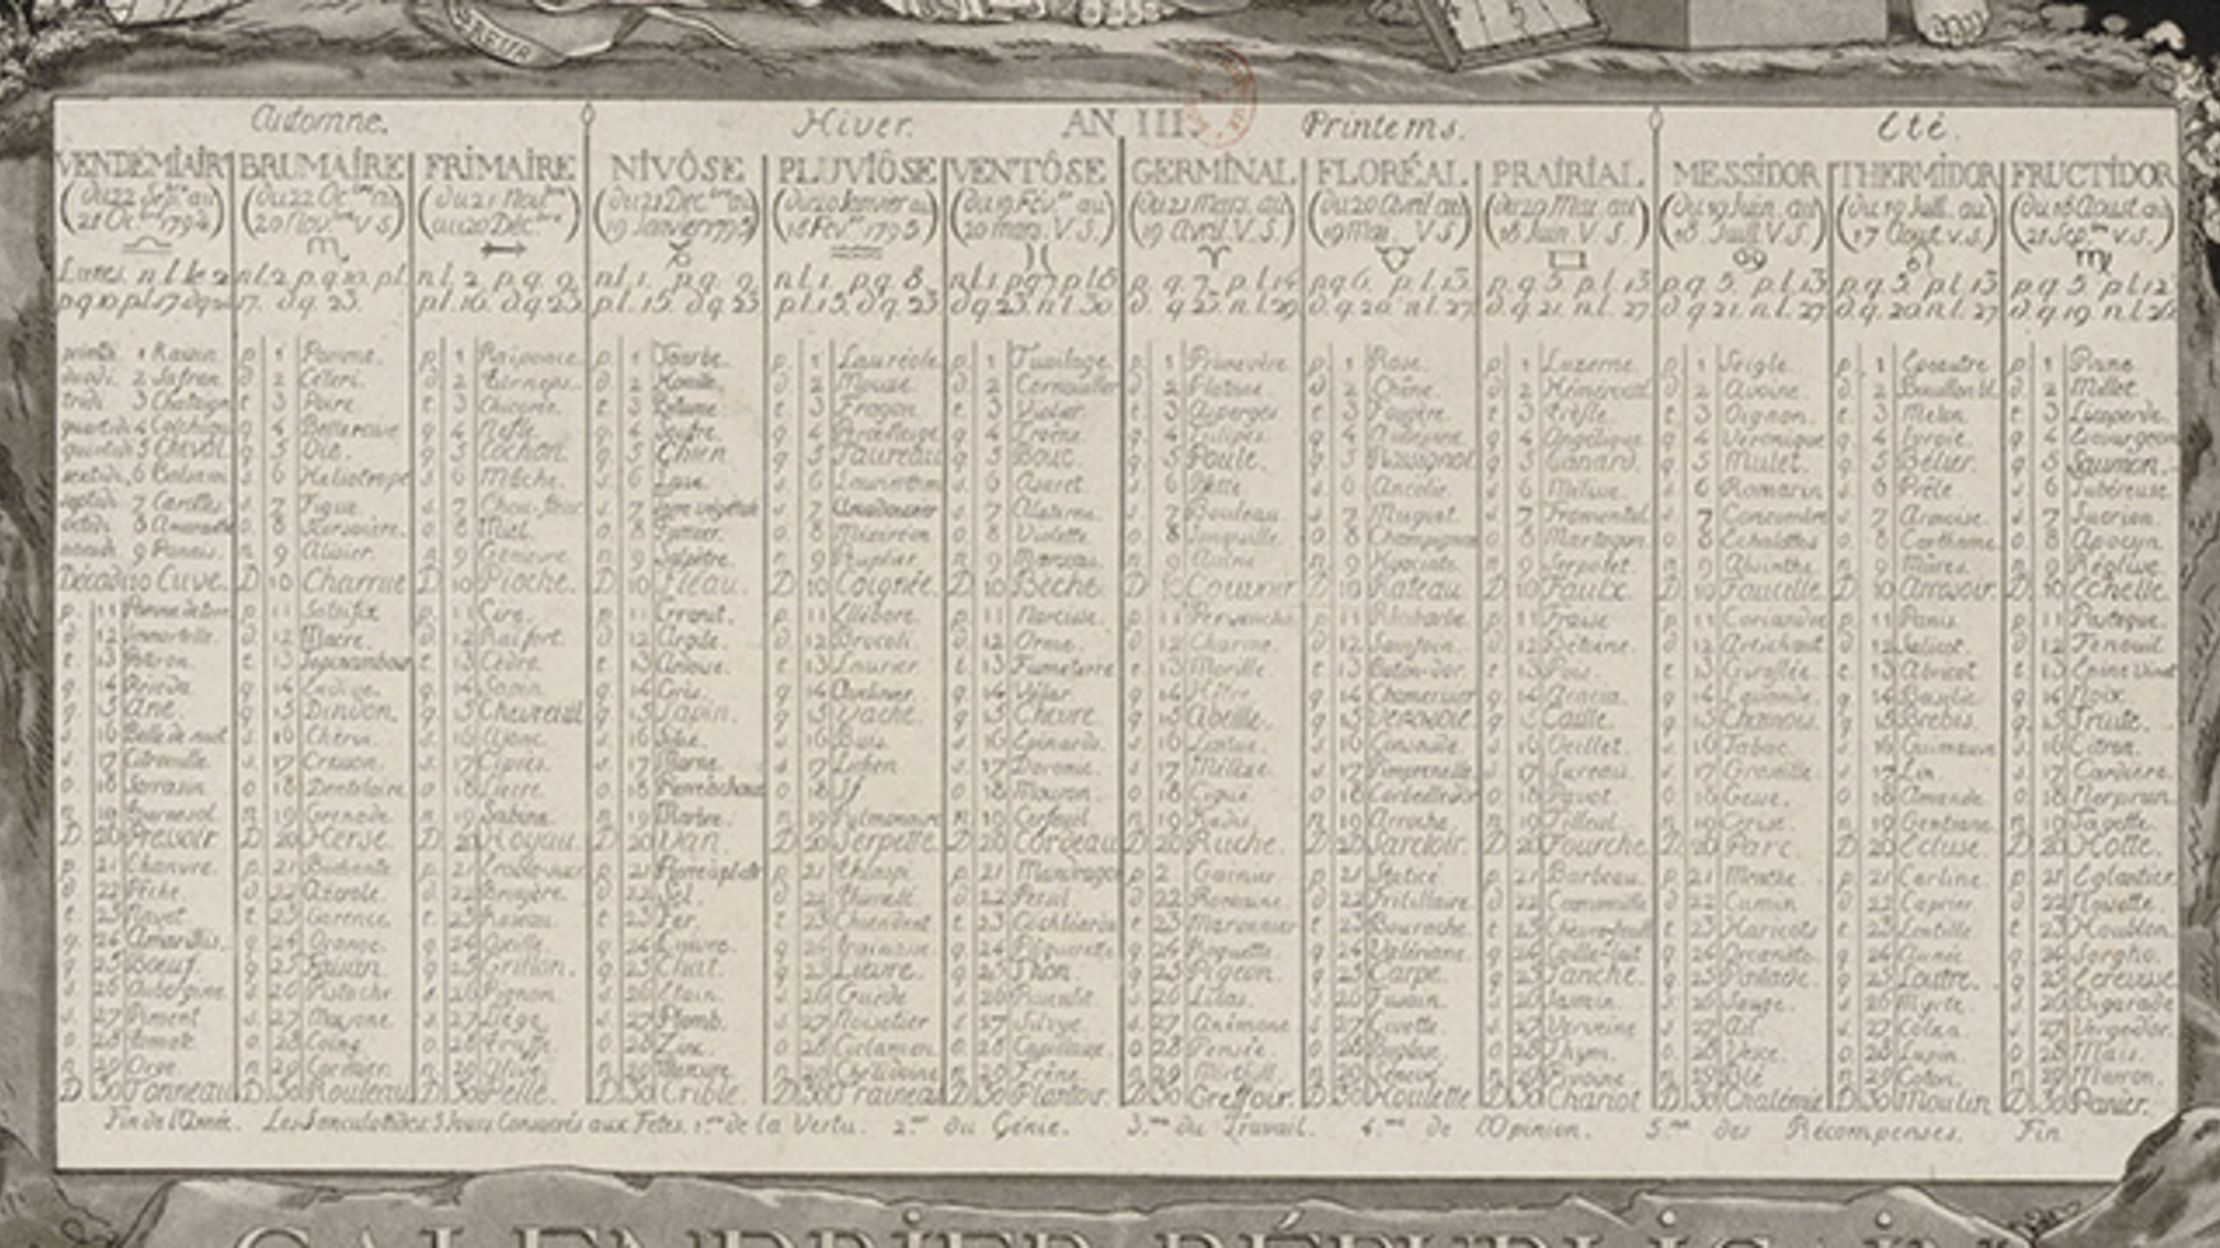 211 Years Ago Today the French Abandoned Their Decimal Calendar